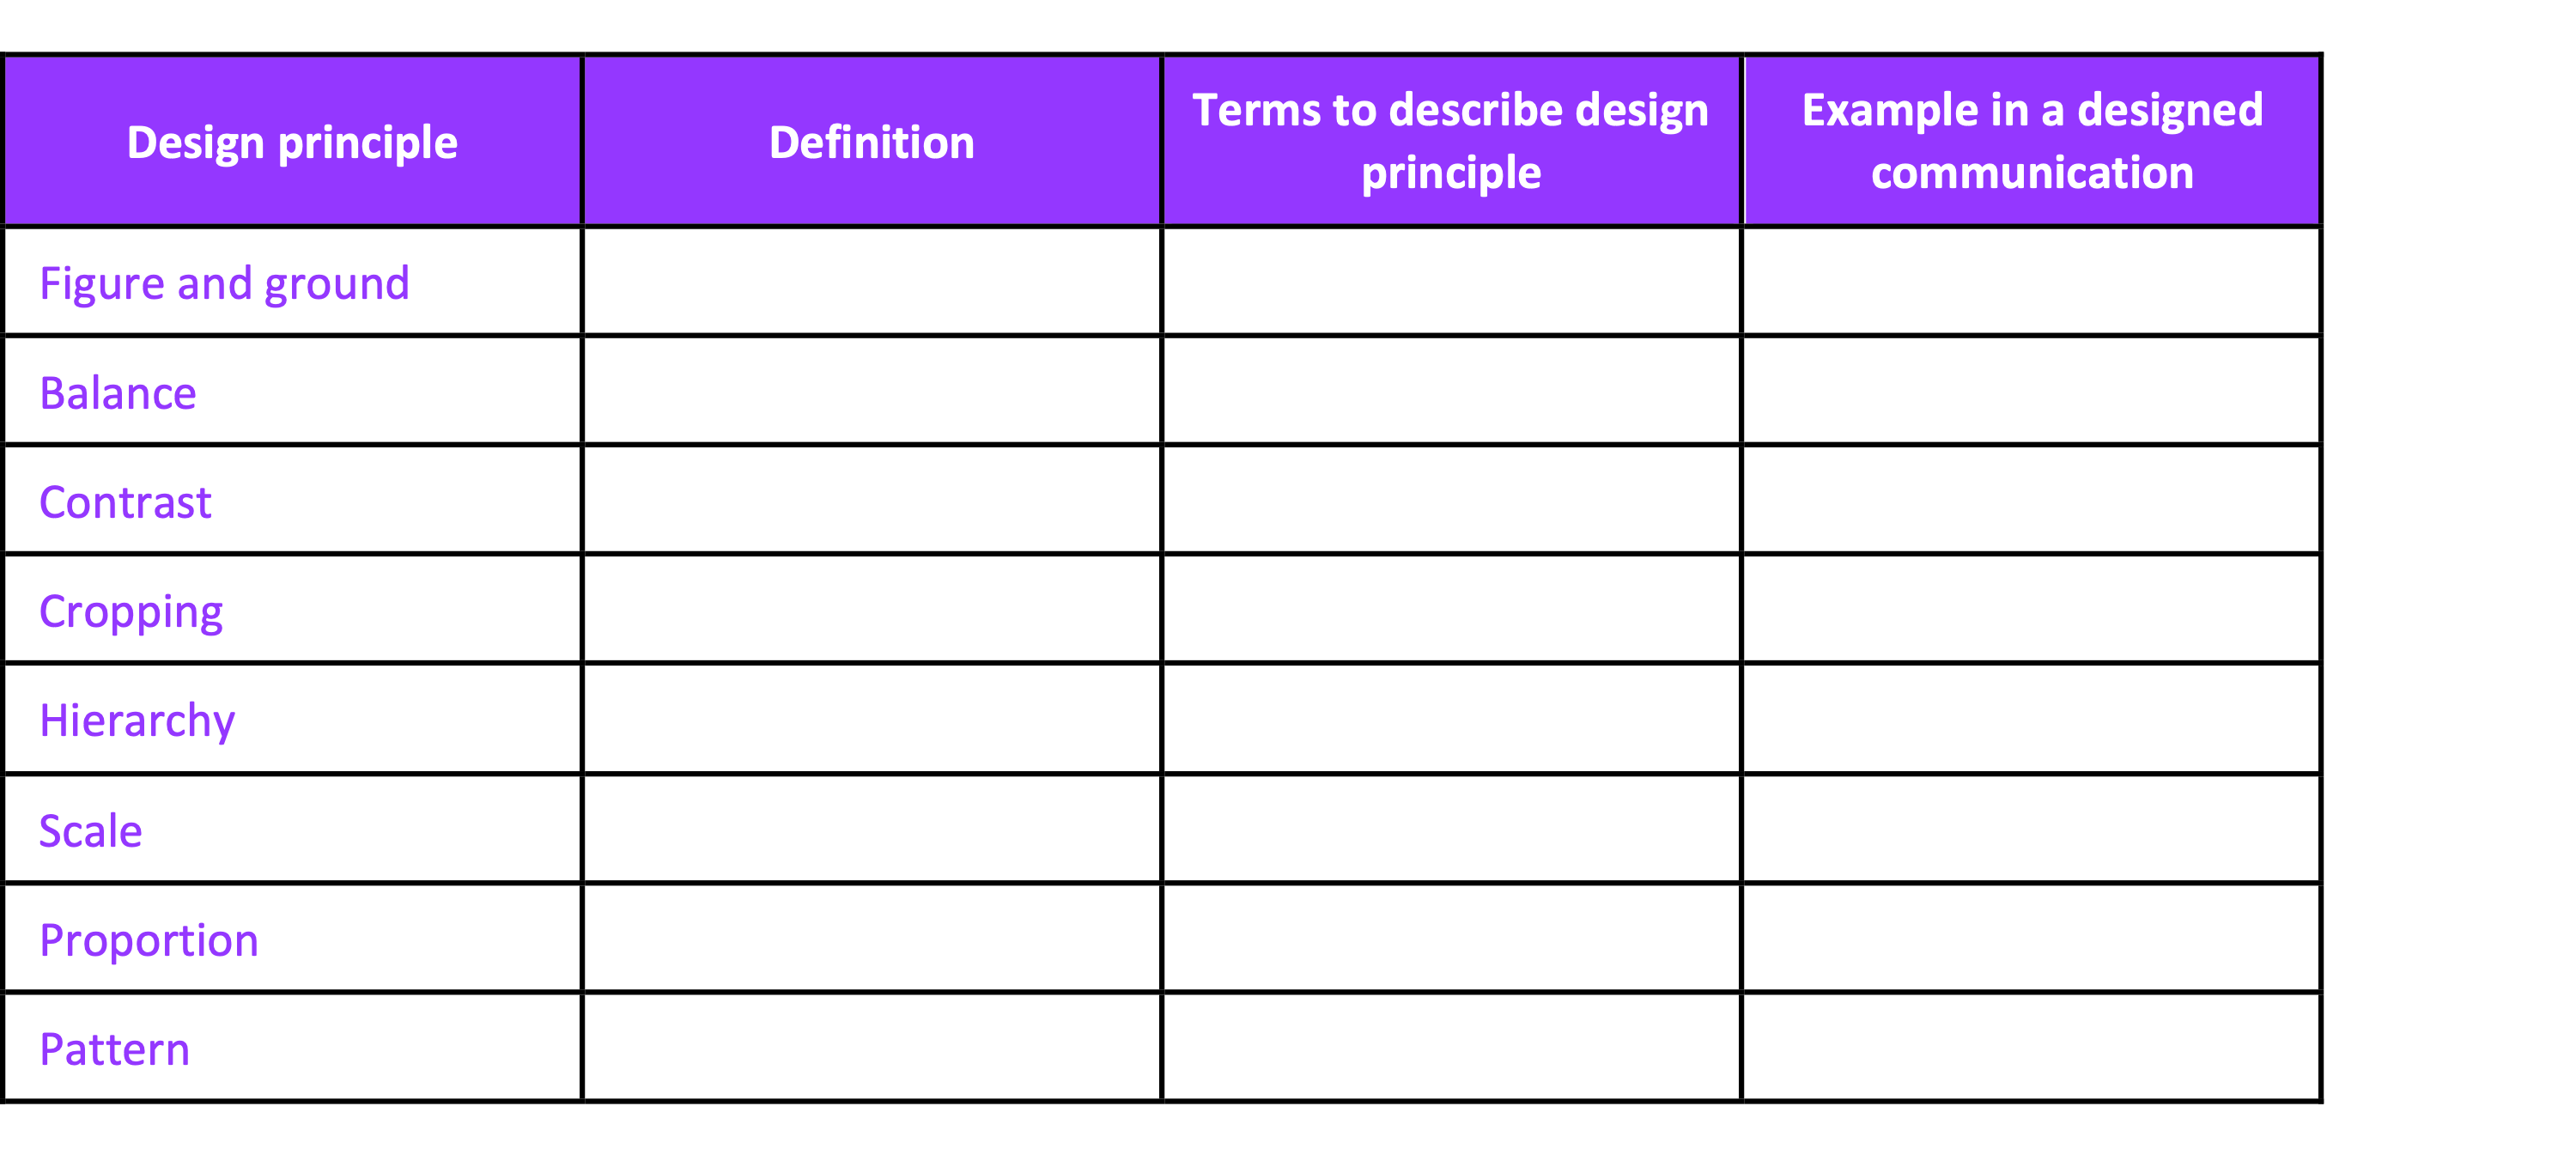 An empty table that lists design principles. For each principle, students must write a definition, list terms used to describe that principle, and provide an example in a designed communication.